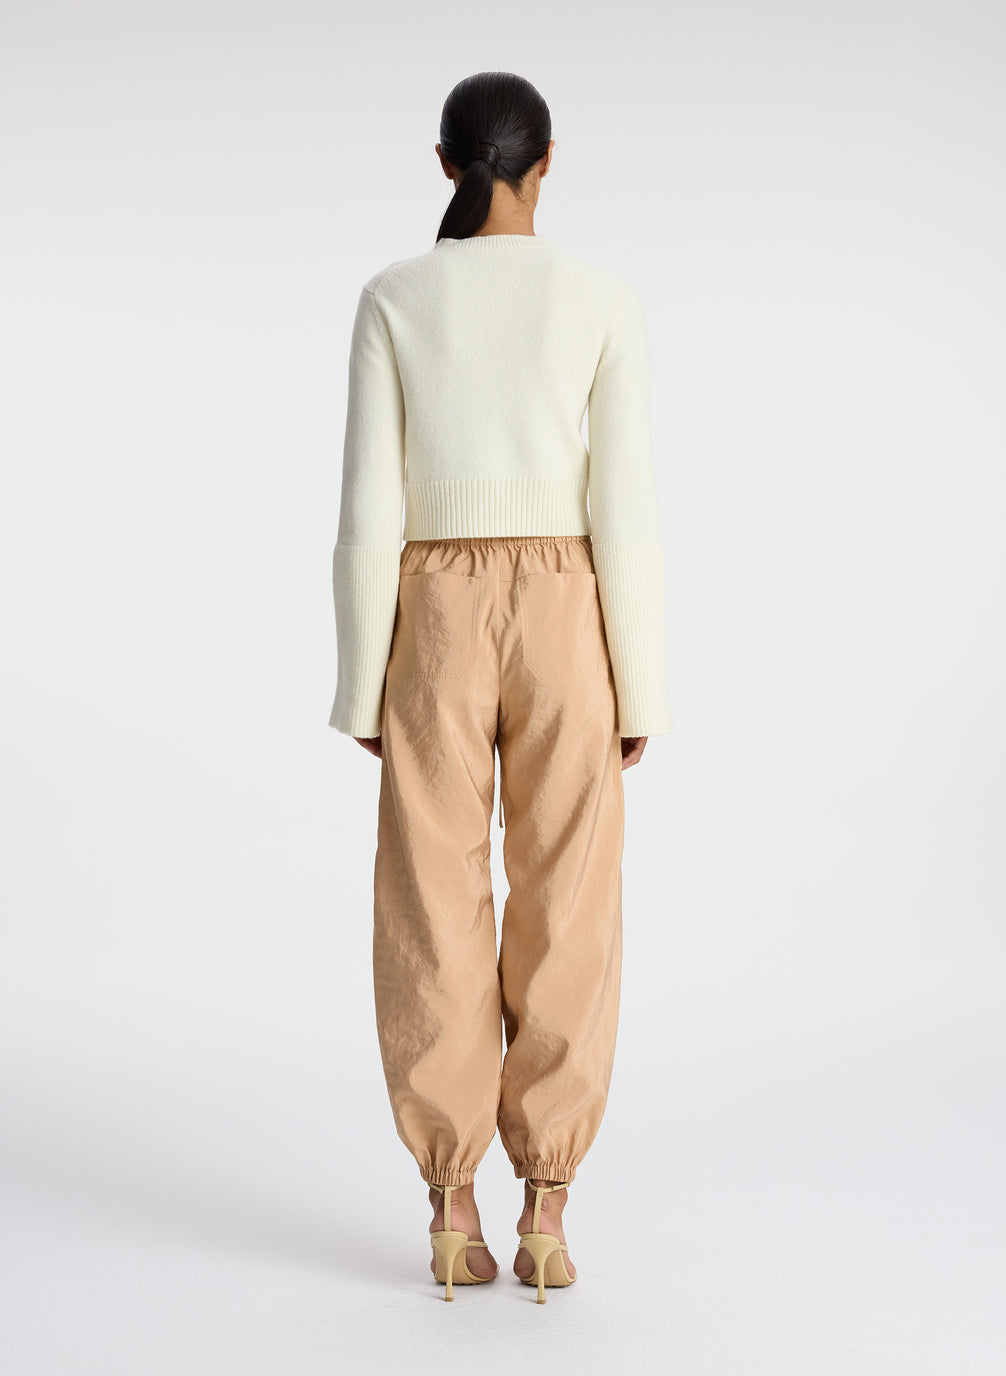 back view of woman wearing white sweater and beige nylon drawstring pants